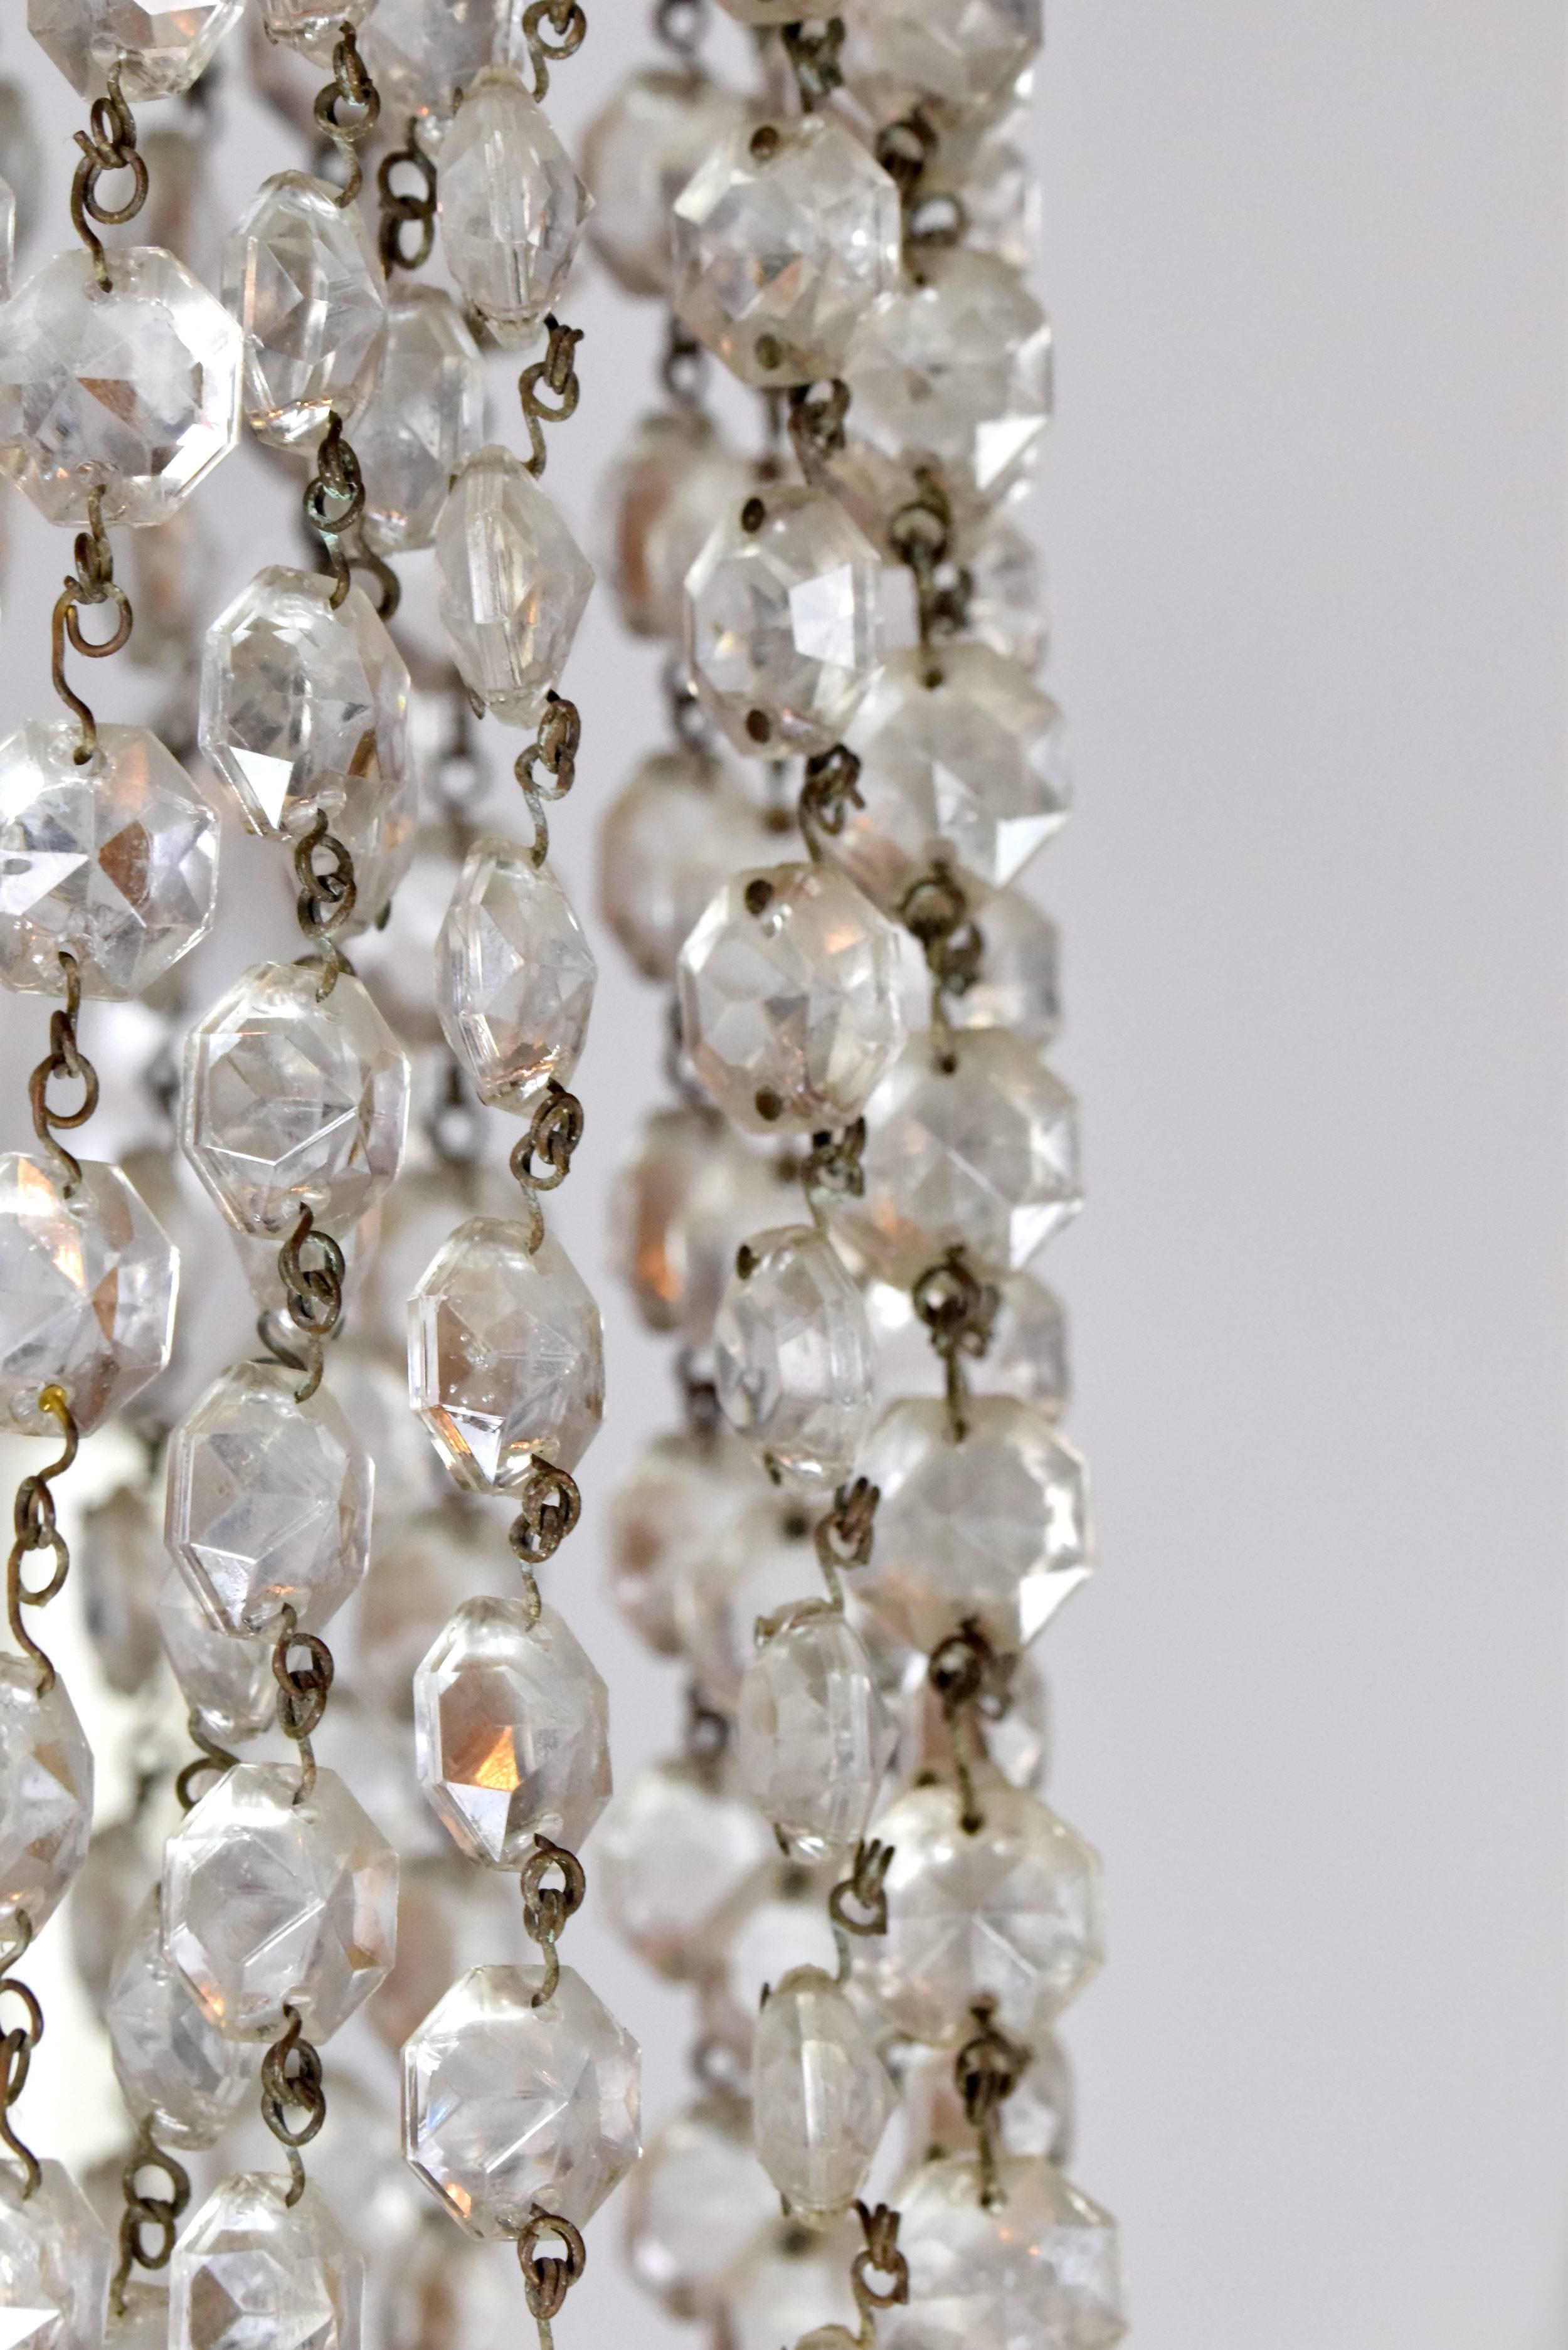 Tall, staggered candlesticks, myriad glinting crystals of all shapes and sizes, and elegantly sweeping arms give this chandelier an air of sophistication and glamour. Small crystals cascade from top to bottom, creating a blanket effect of rich